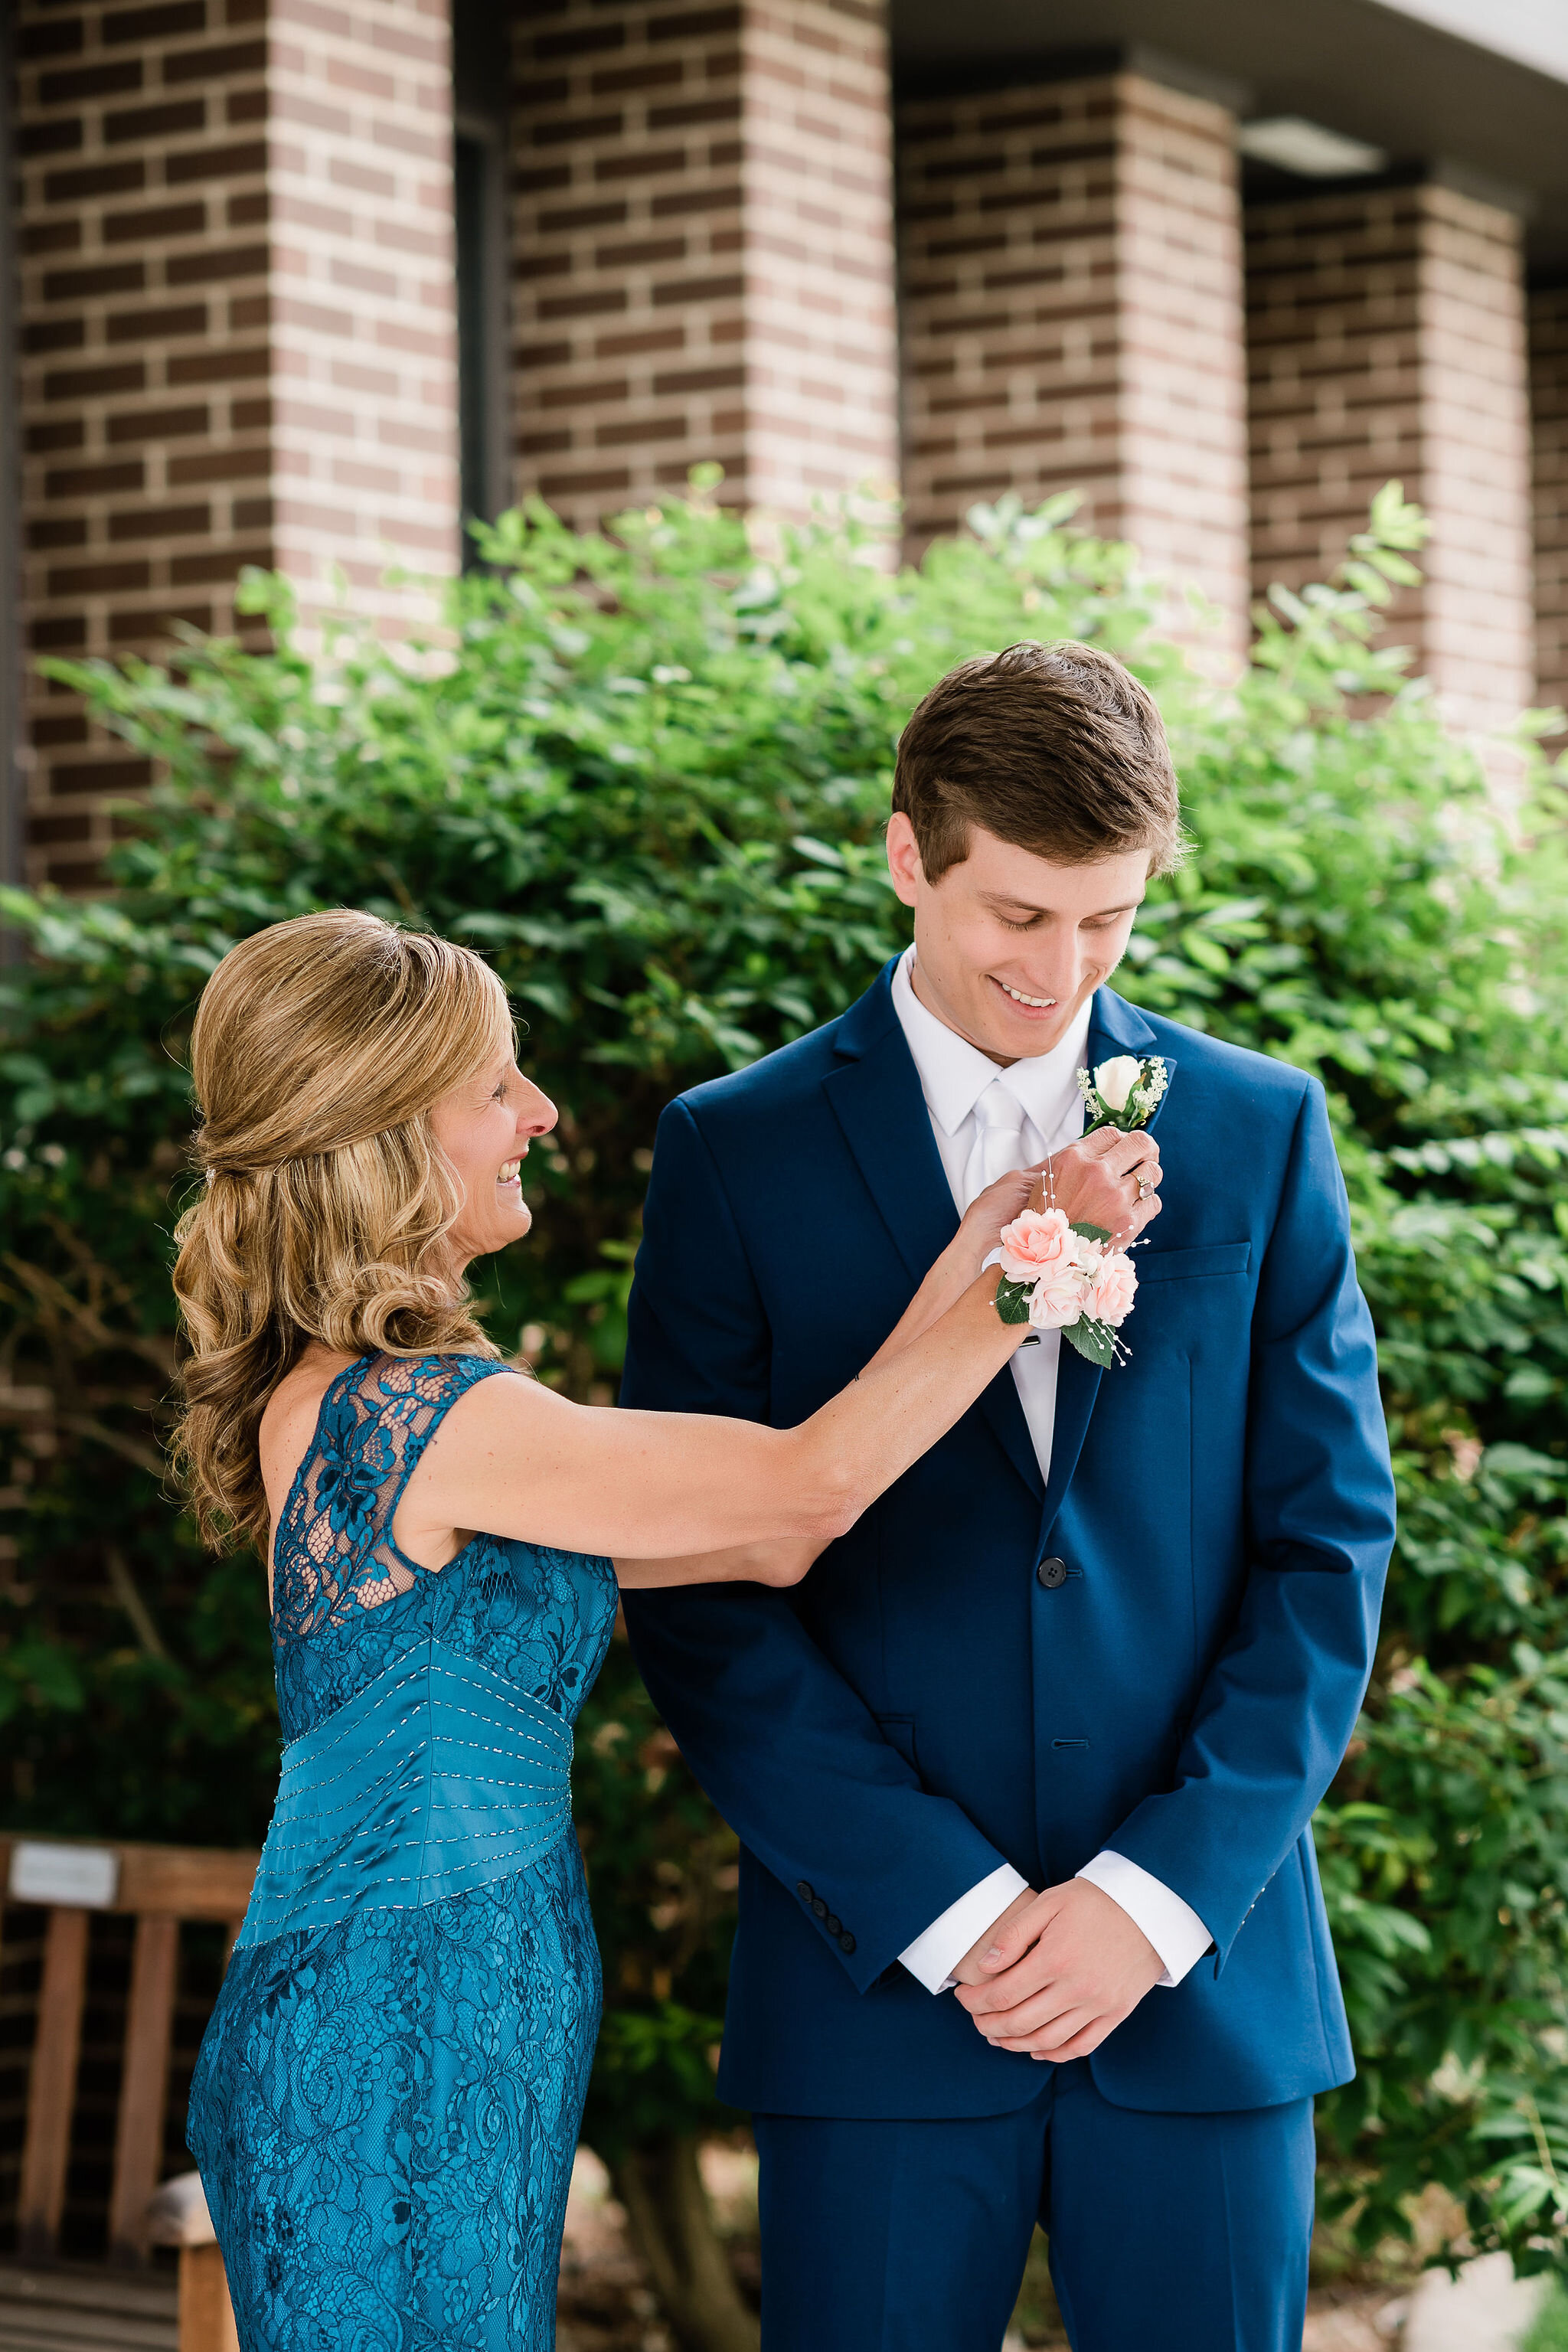 Mother of the groom pinning the groom's boutonniere on him